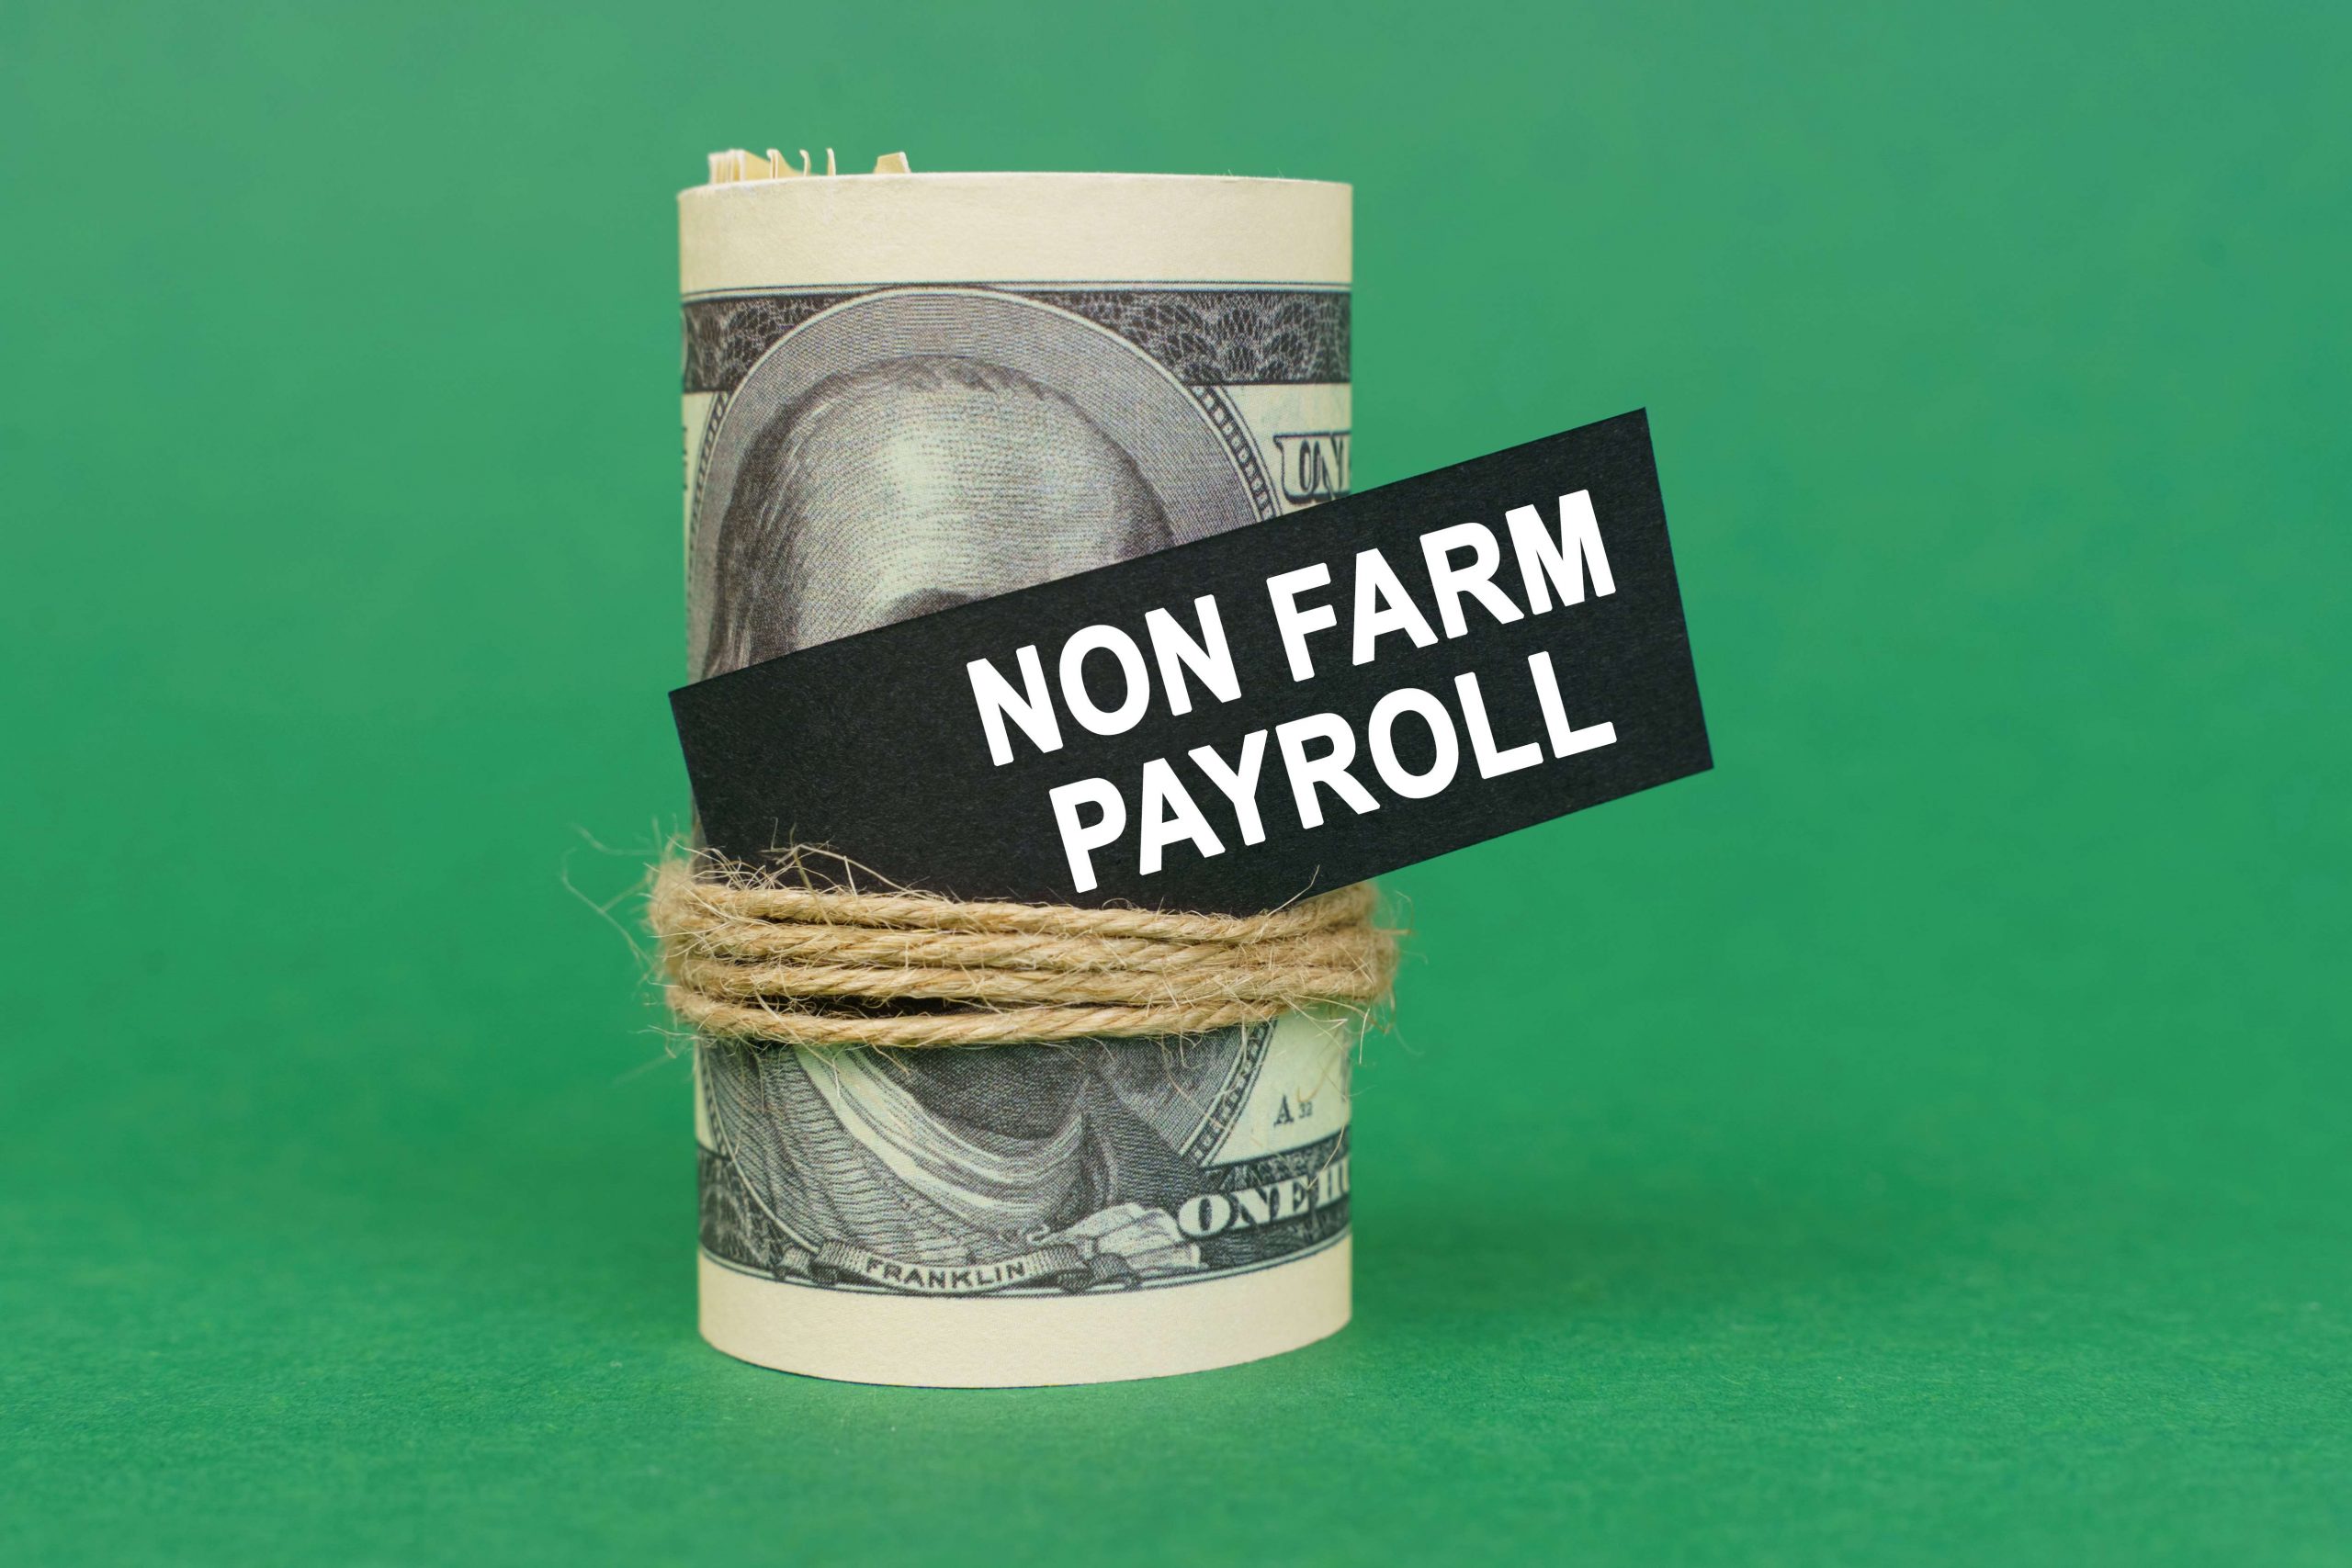 What happened with Non-Farm Payrolls (NFP)